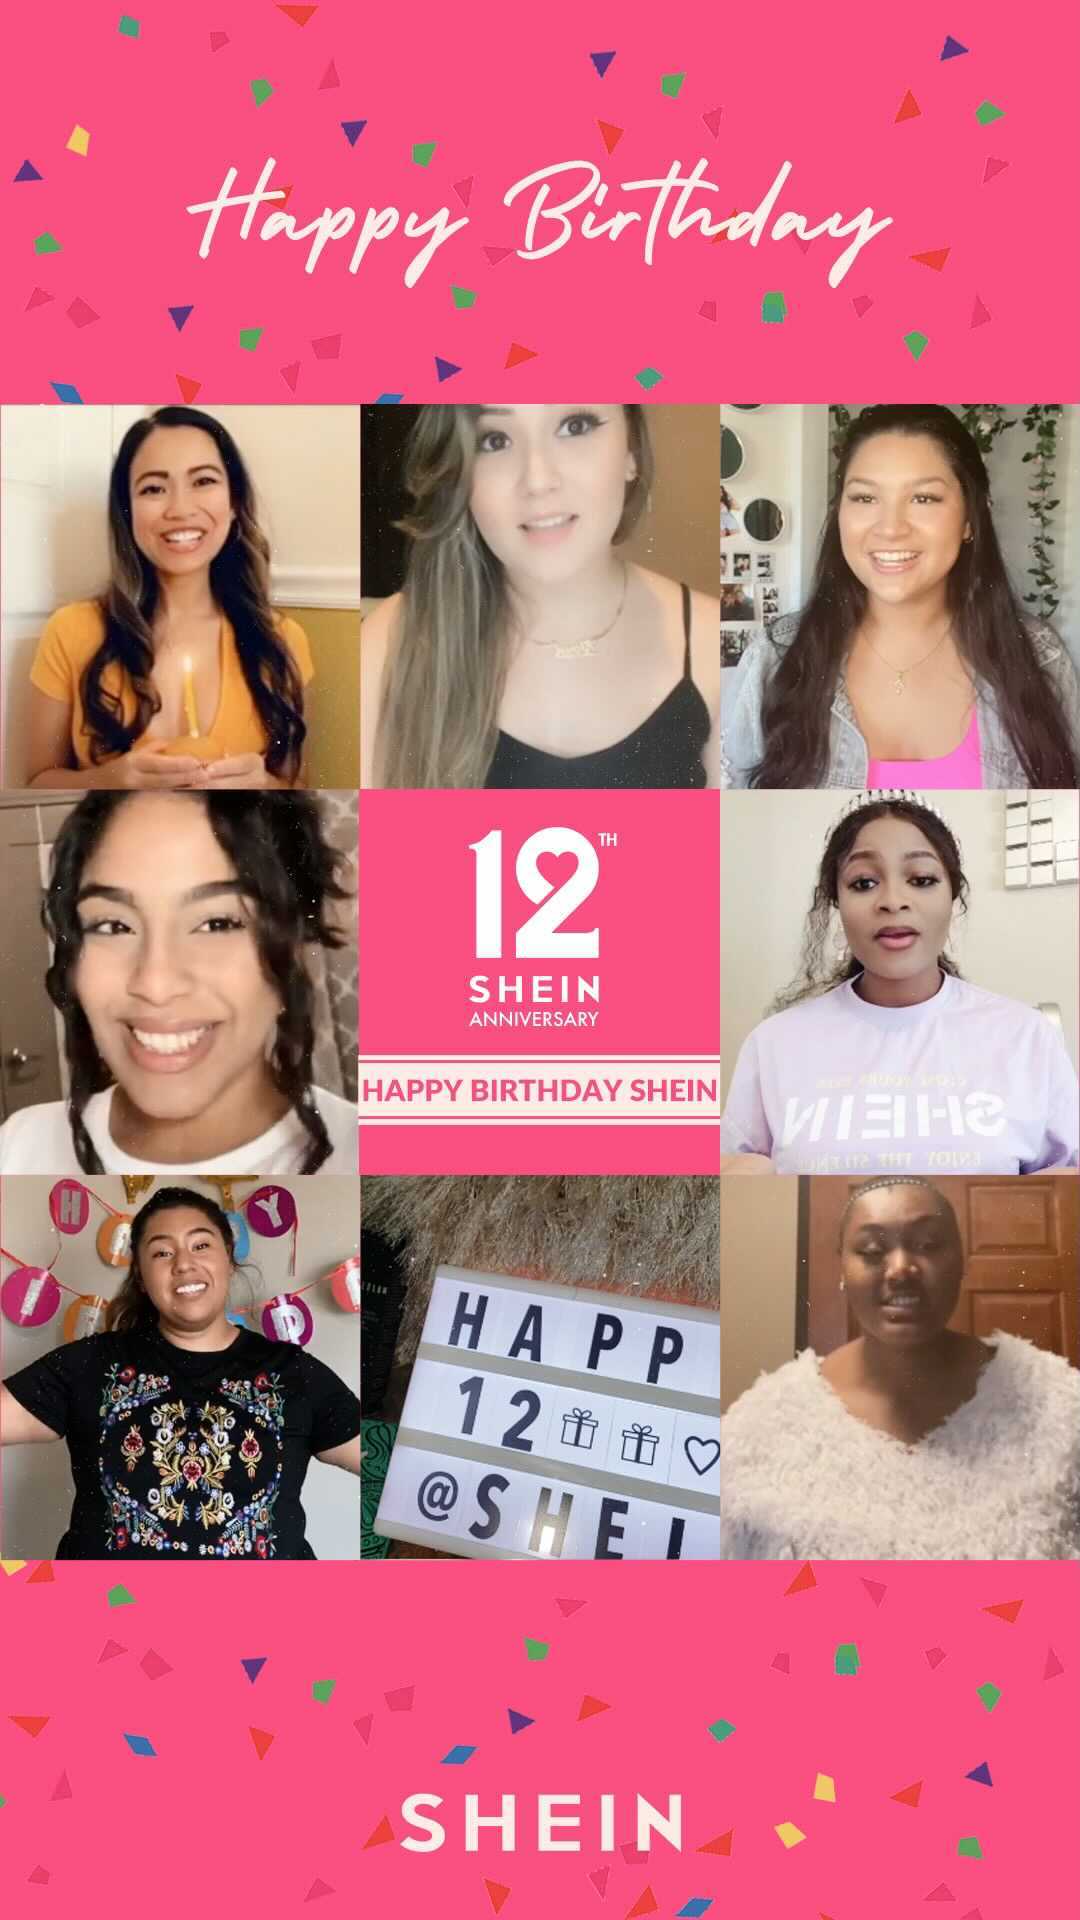 SHEIN.COM - What an amazing 12 years it's been! To celebrate this milestone, we asked our Campus Ambassadors what they love about SHEIN 💖More importantly, we want to thank you all for being a part of...